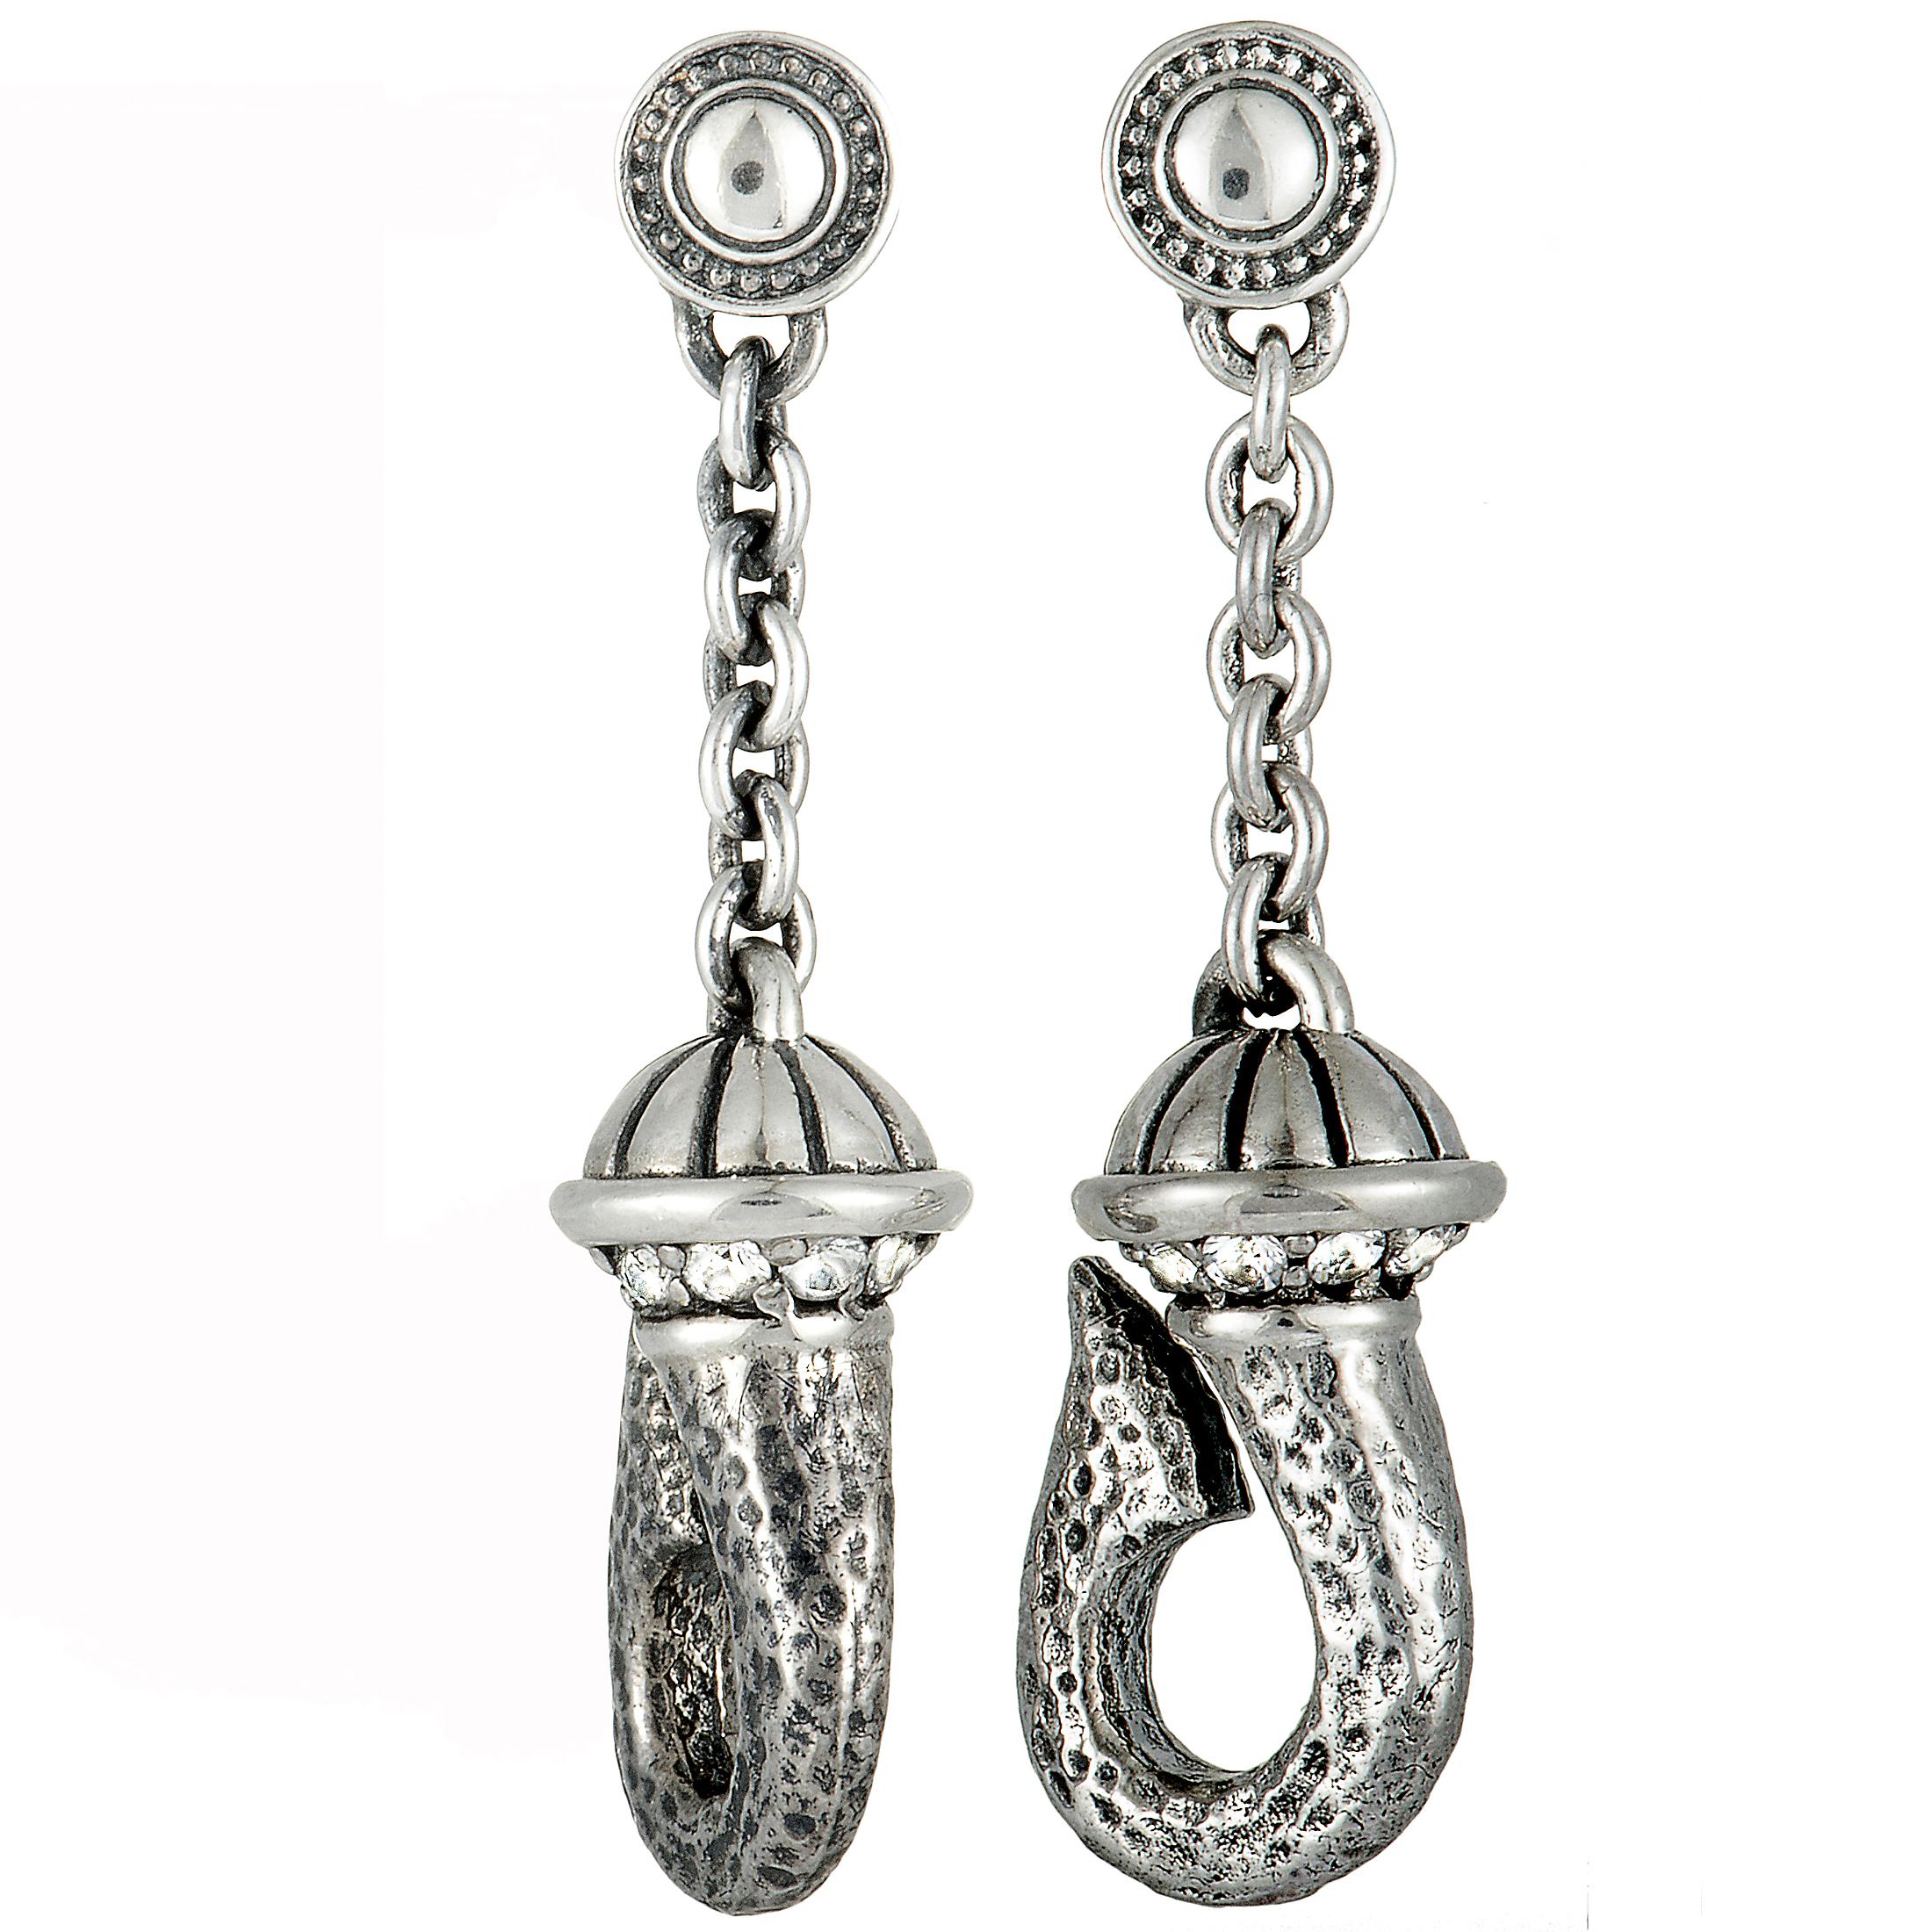 Add an incredibly offbeat touch to your ensembles with these stunning earrings that compel with their attractively unconventional design and distinctly luxurious décor. The earrings are presented by Scott Kay and the pair is exquisitely crafted from